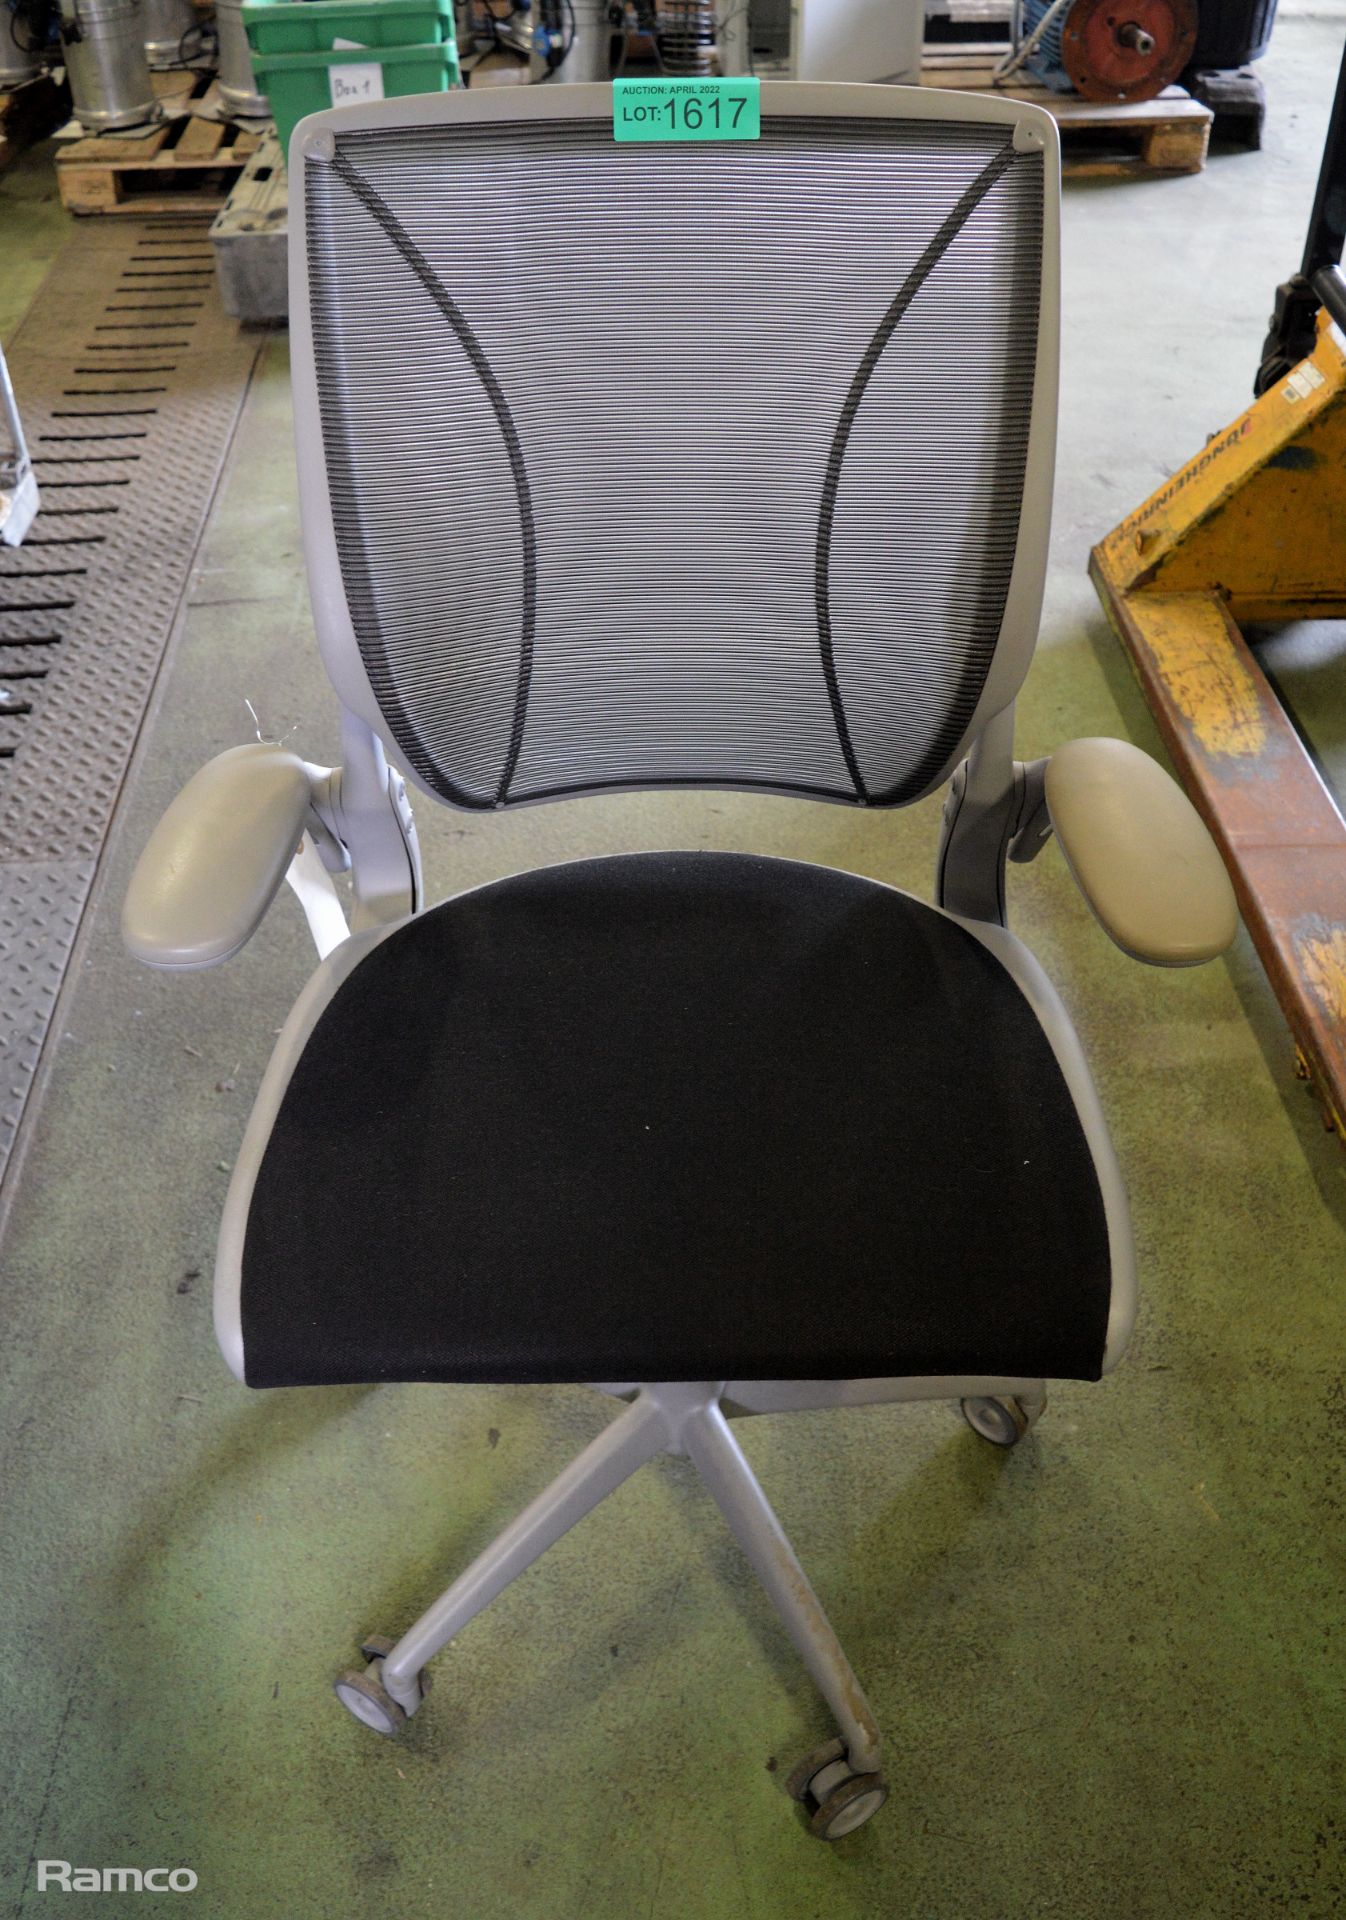 HumanScale Ergonomic Office Chair - grey - Image 2 of 3